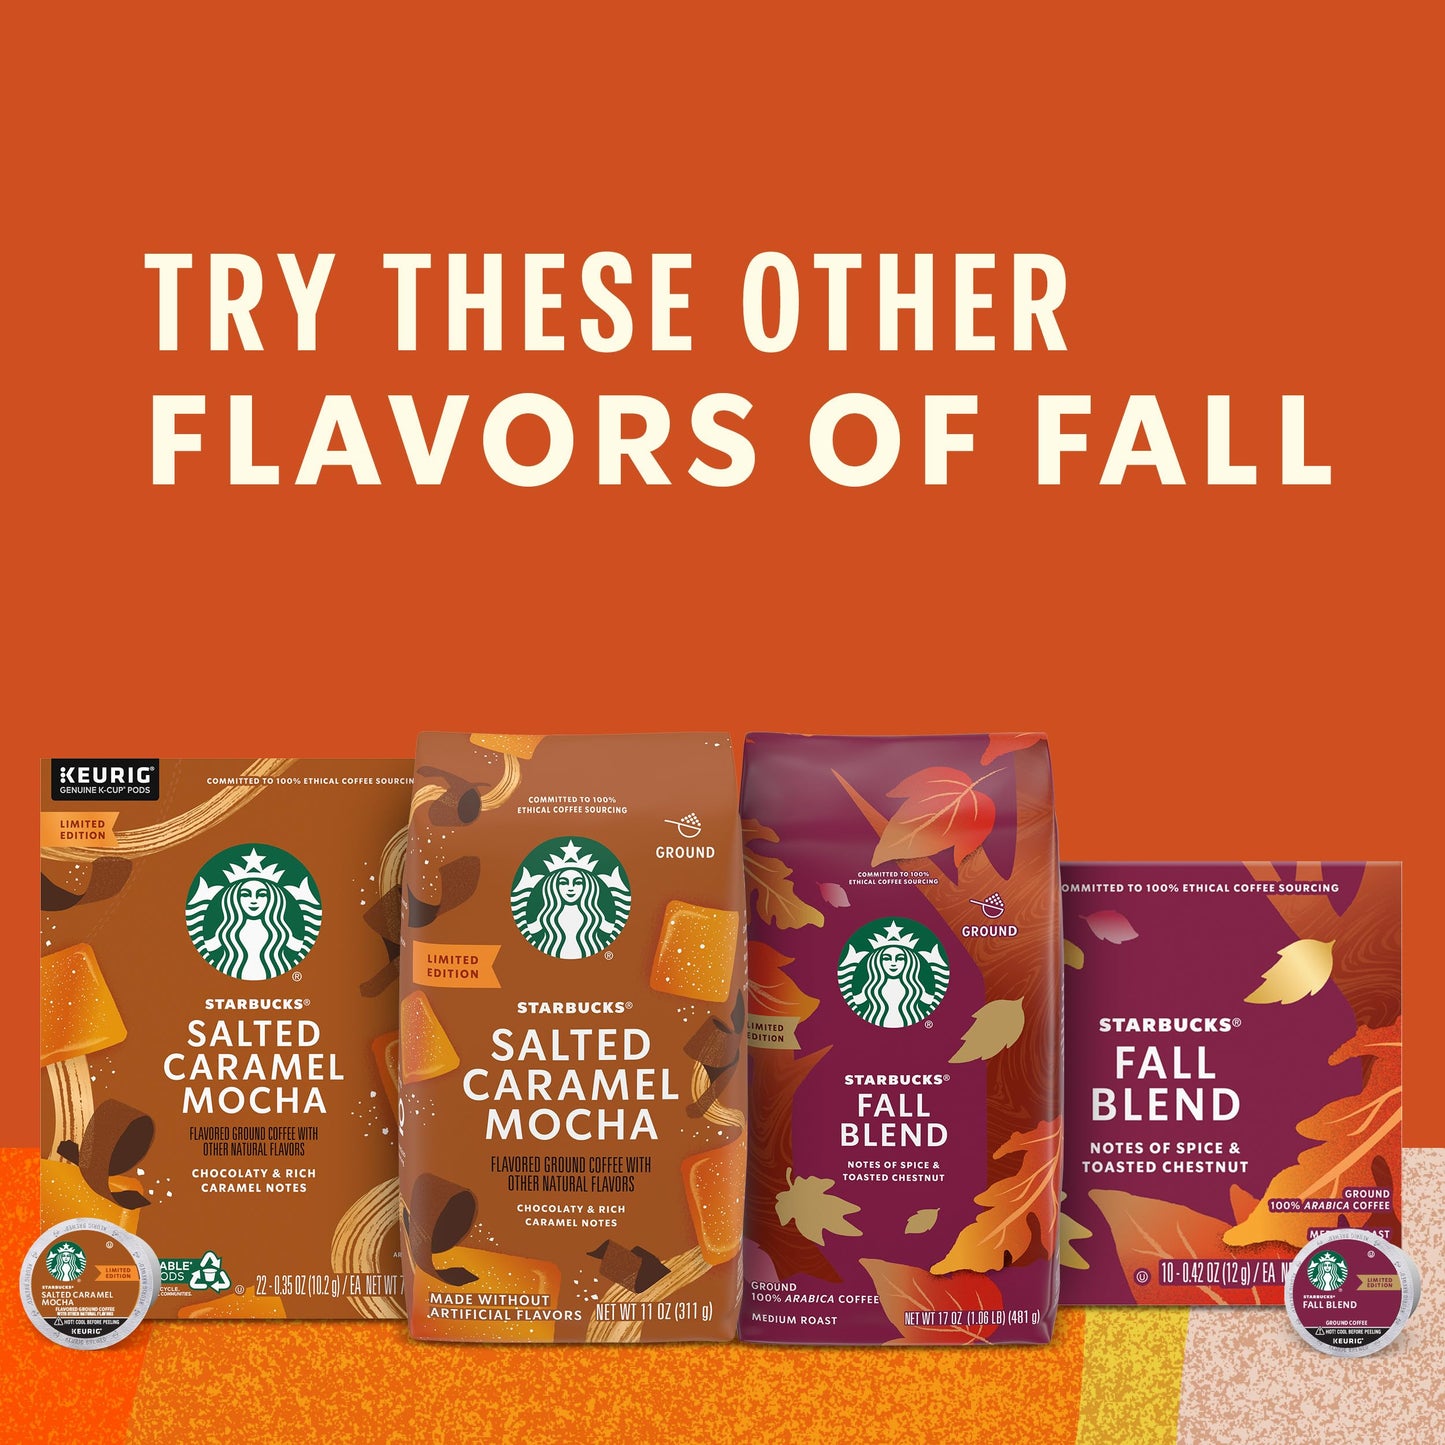 Starbucks K-Cup Coffee Pods—Pumpkin Spice Flavored Coffee—100% Arabica—Naturally Flavored—1 box (32 pods)